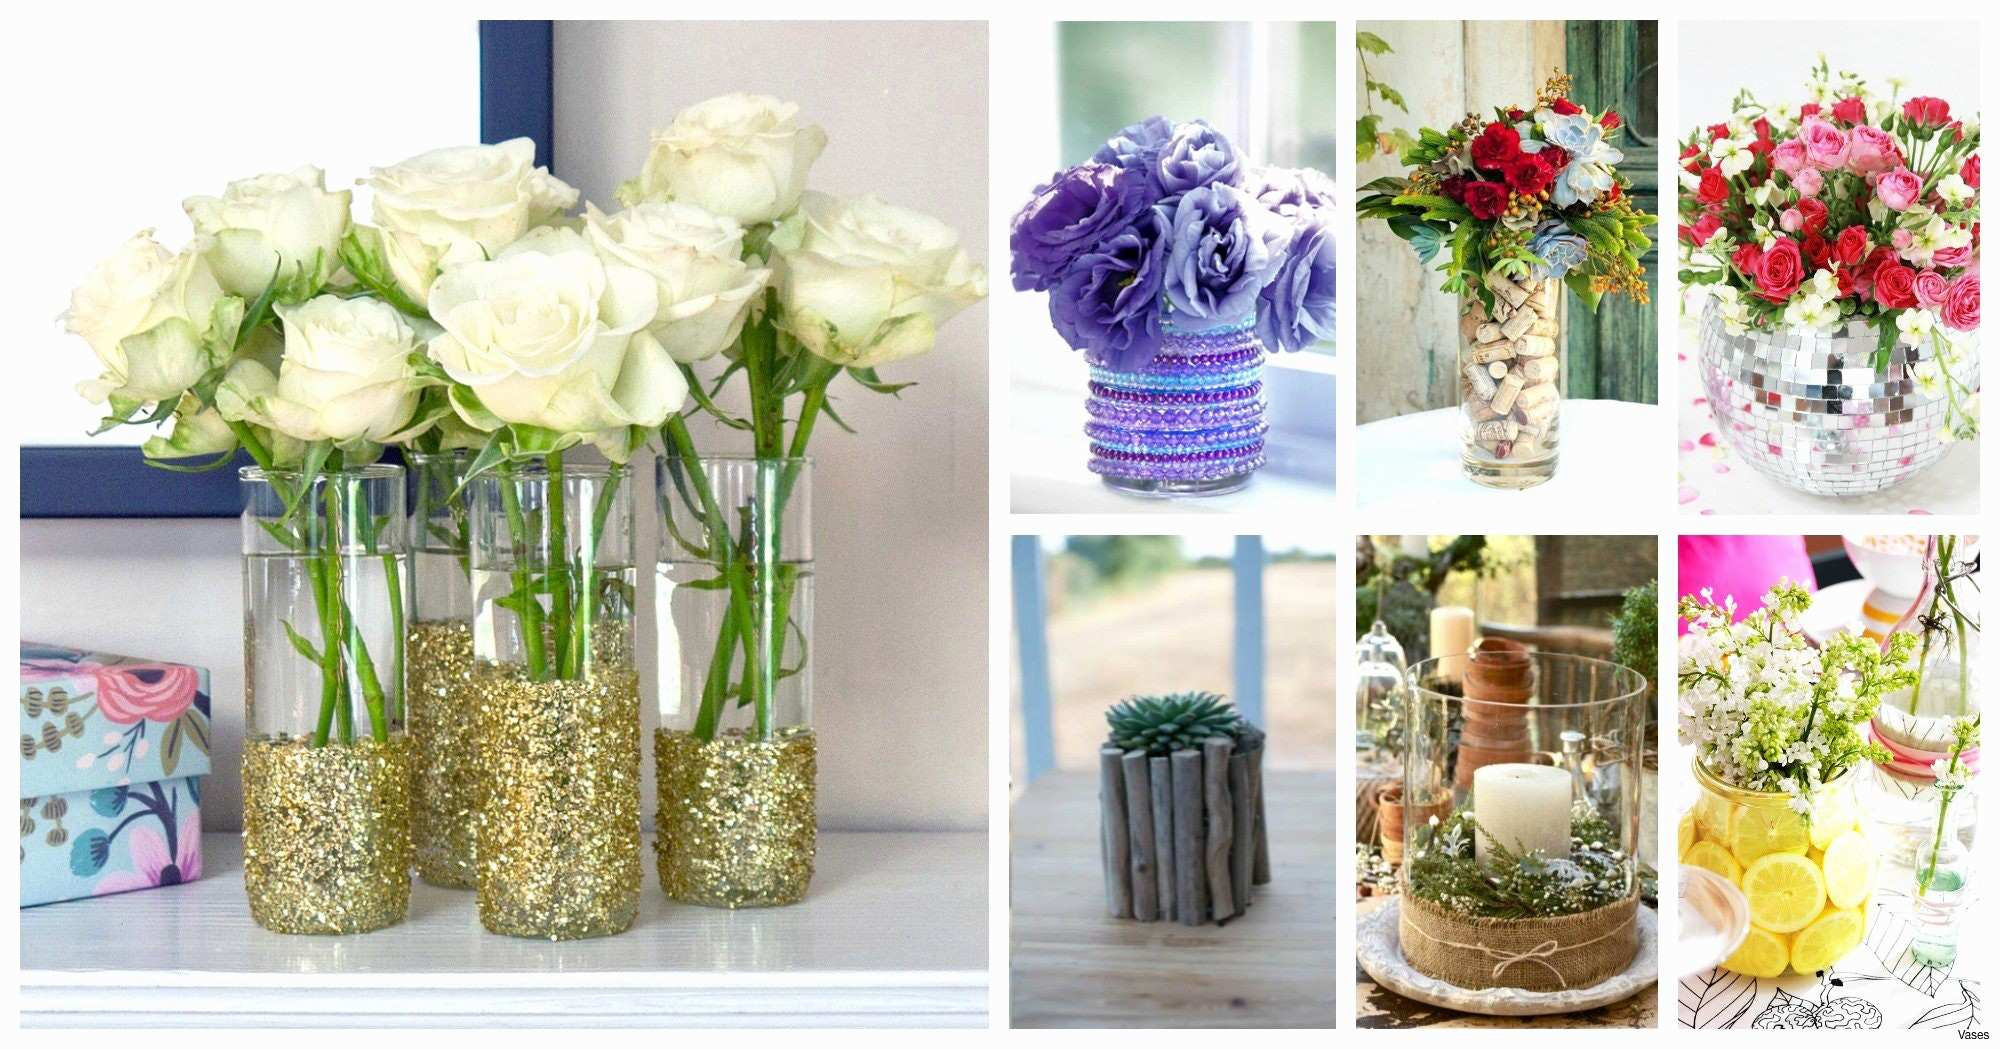 29 Awesome Glass Cylinder Vase Centerpiece Ideas 2024 free download glass cylinder vase centerpiece ideas of decorating ideas for wedding on a budget new dsc h vases square intended for decorating ideas for wedding on a budget new dsc h vases square centerpi